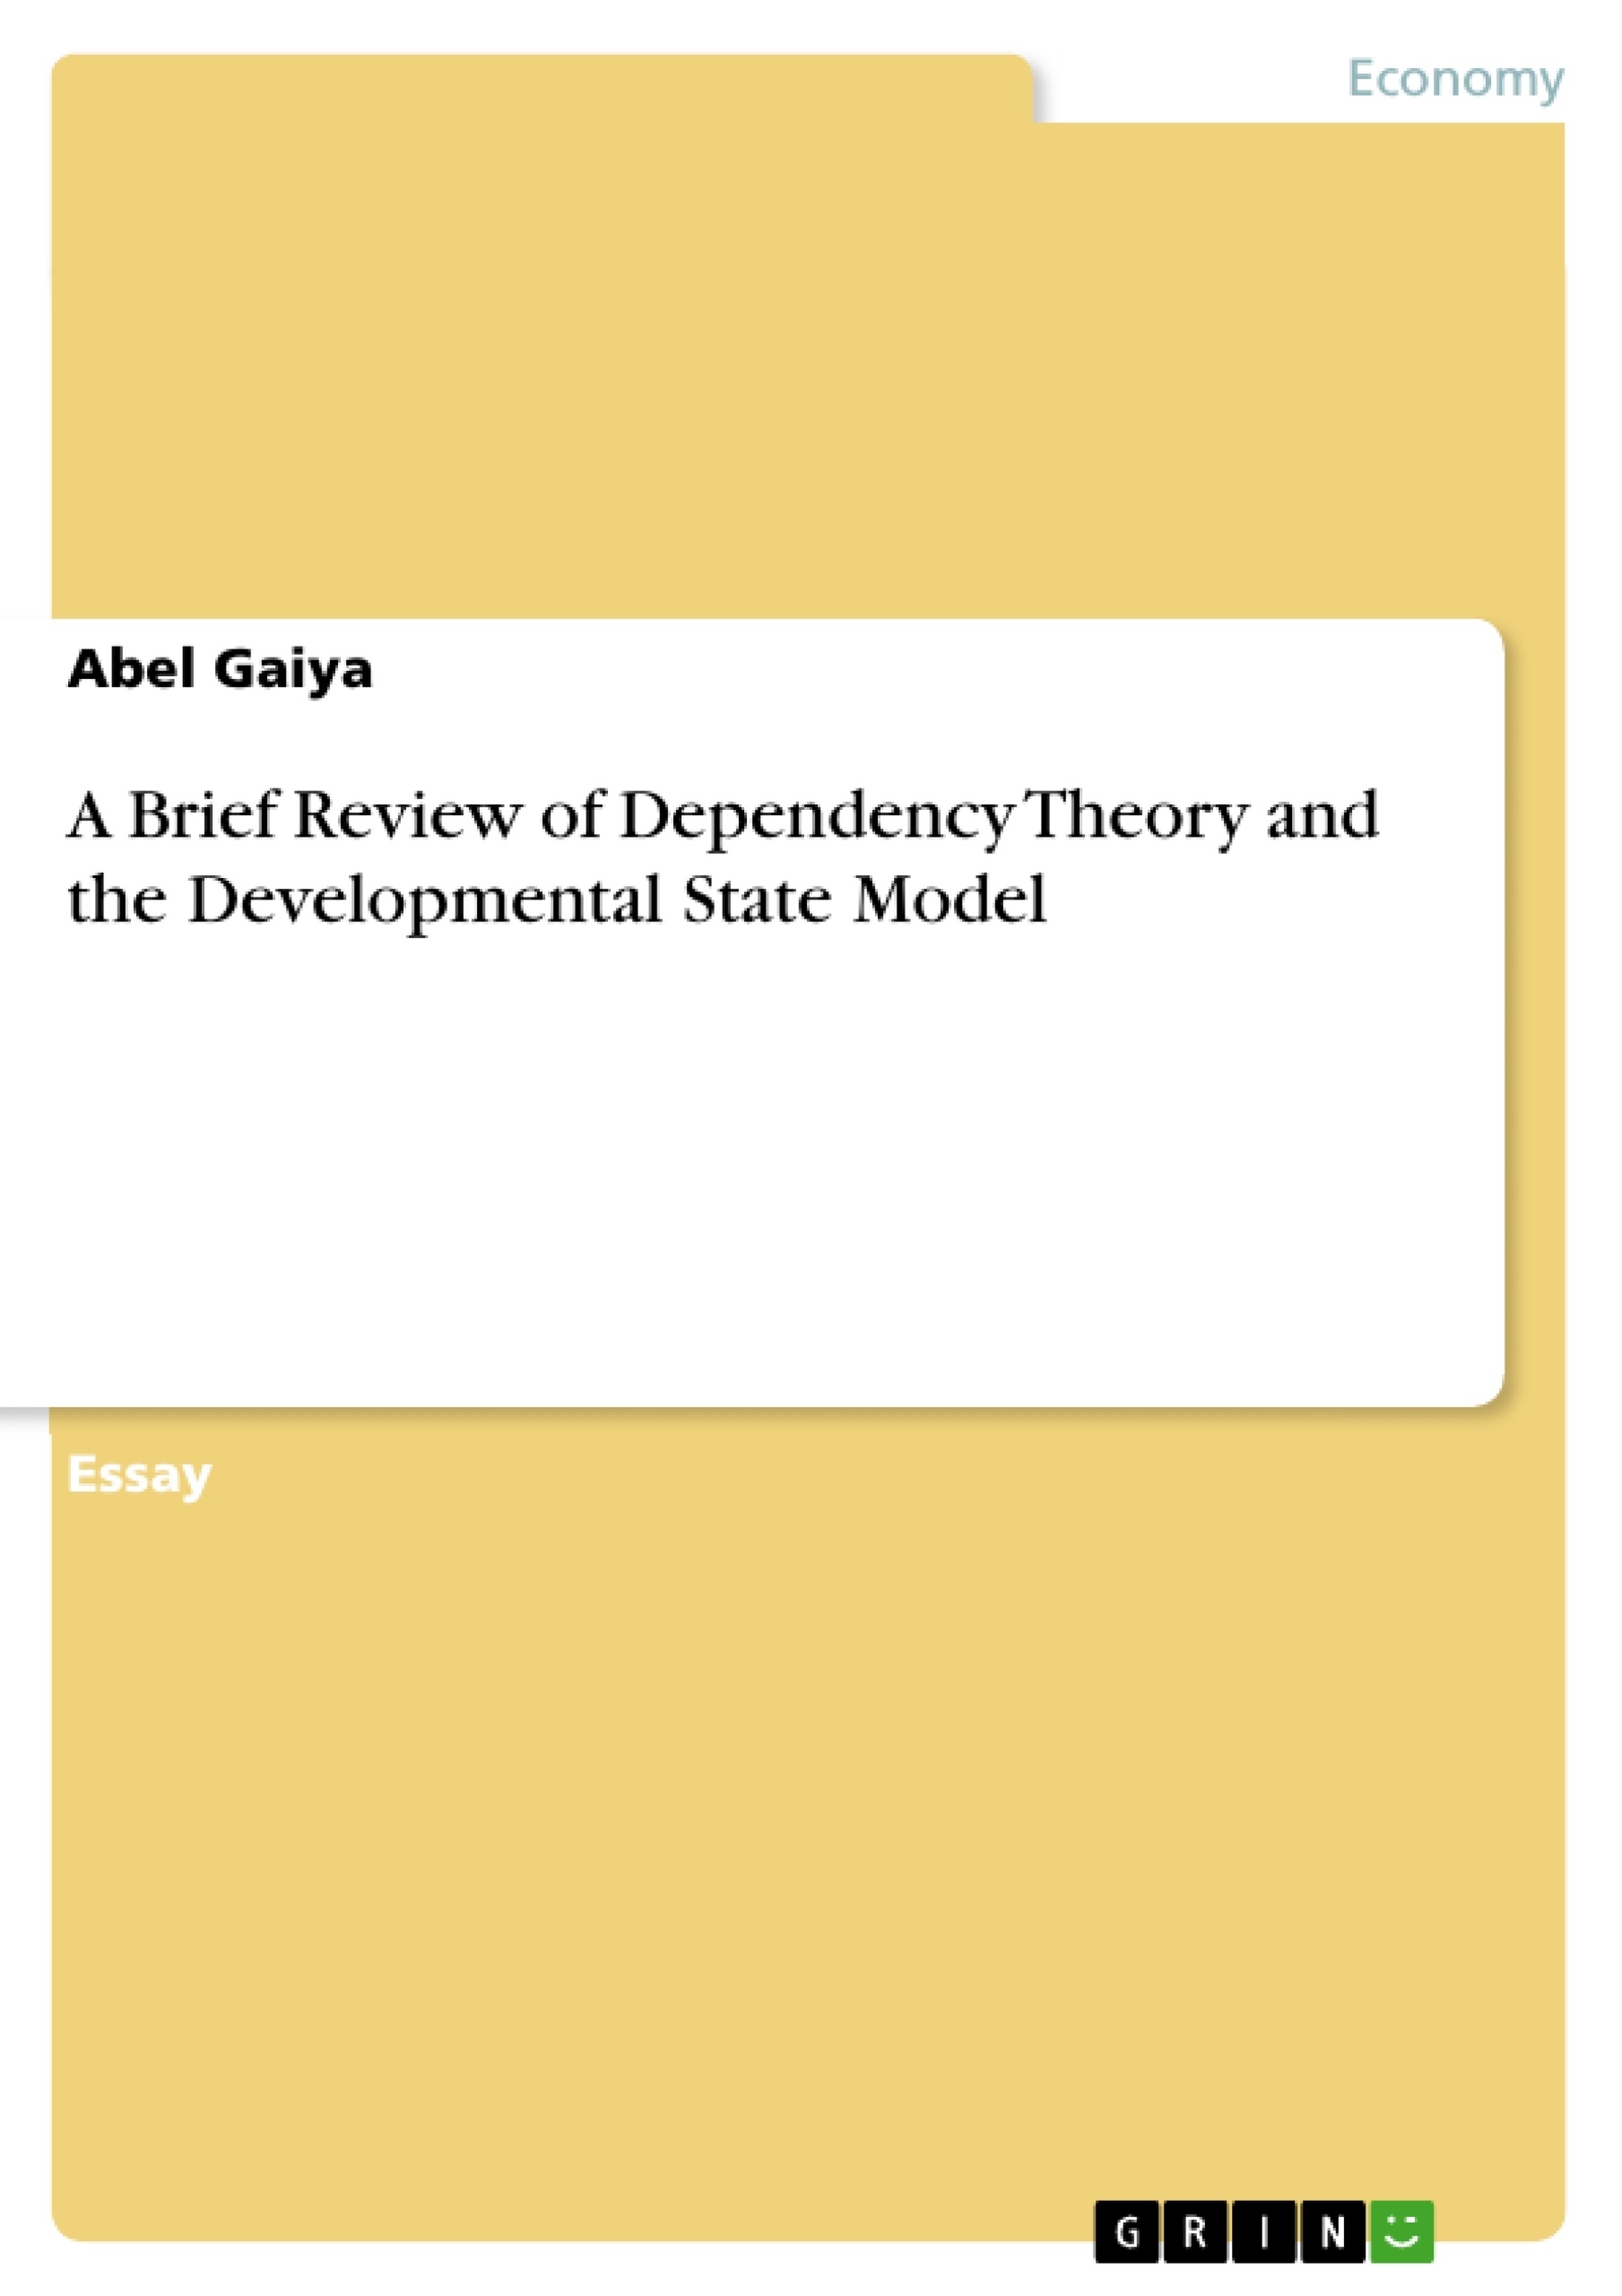 Title: A Brief Review of Dependency Theory and the Developmental State Model